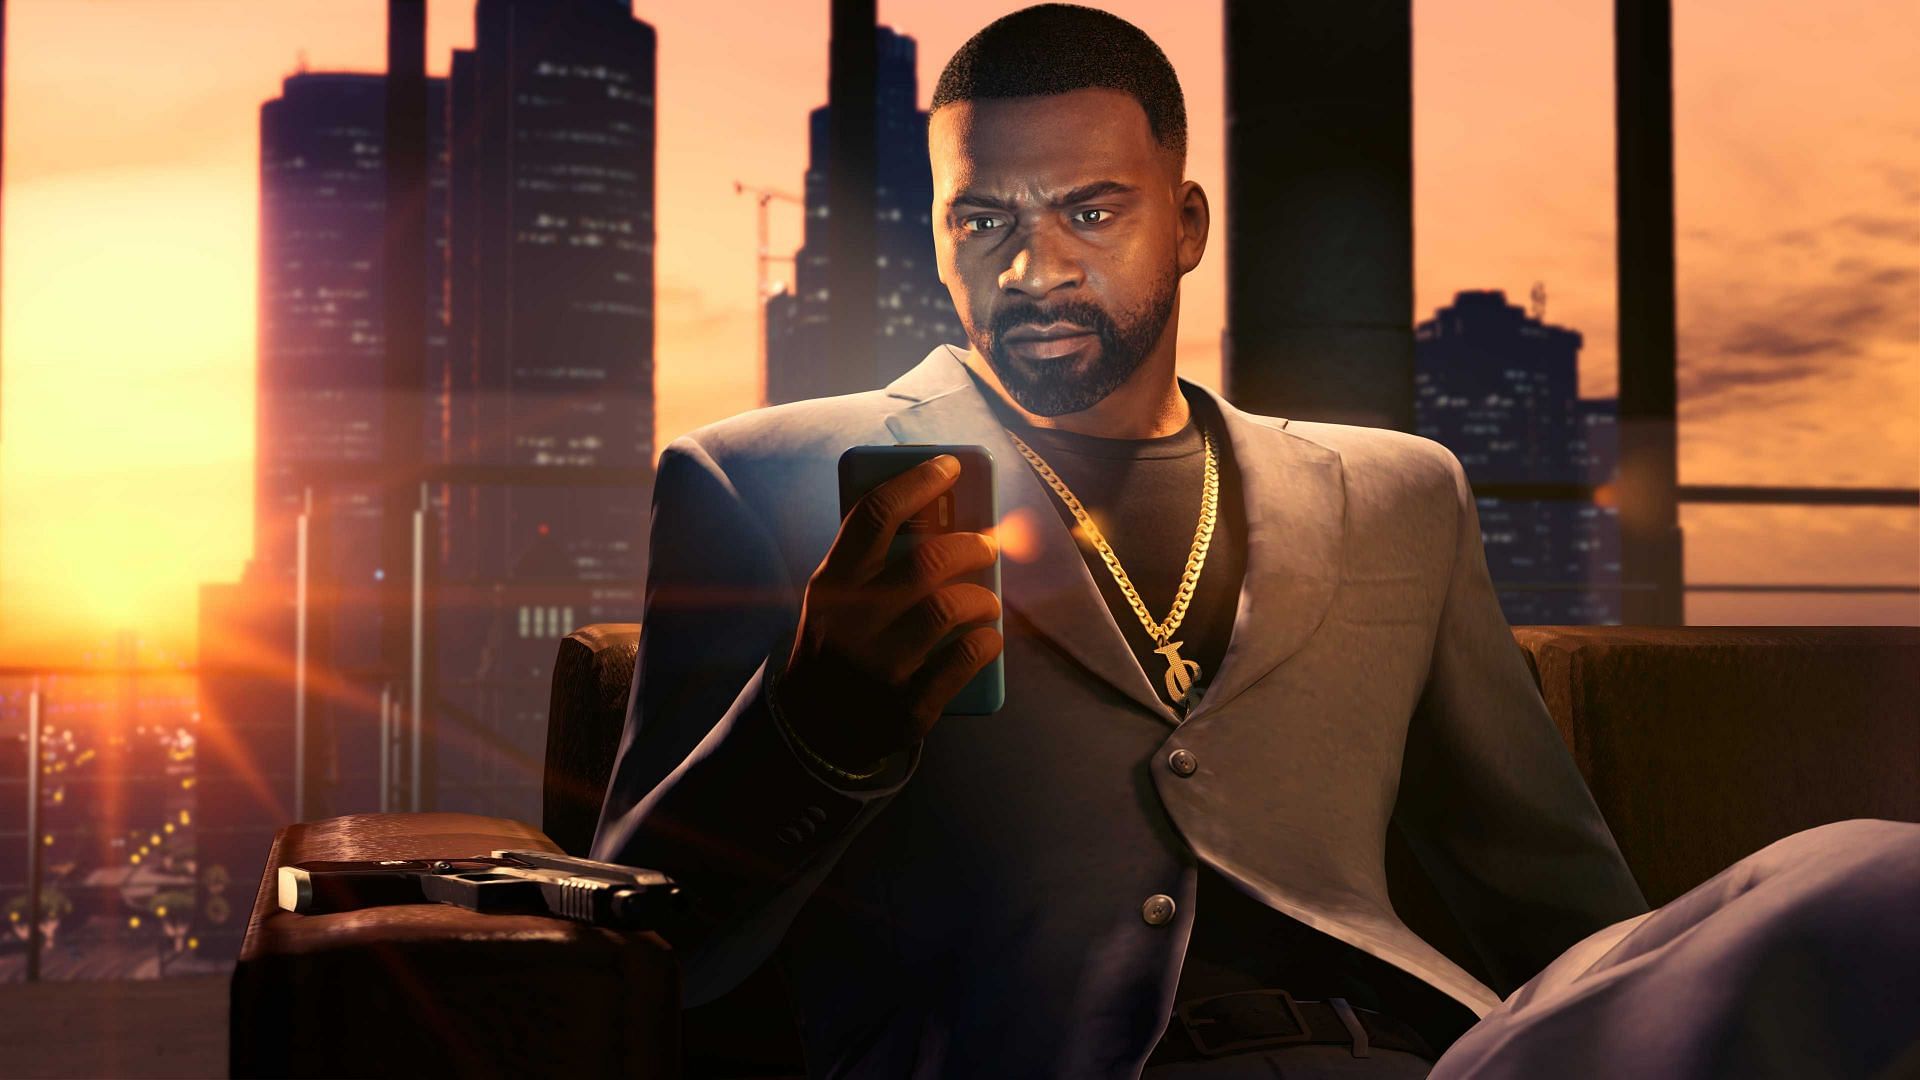 GTA 6 could potentially come out in a few years from now